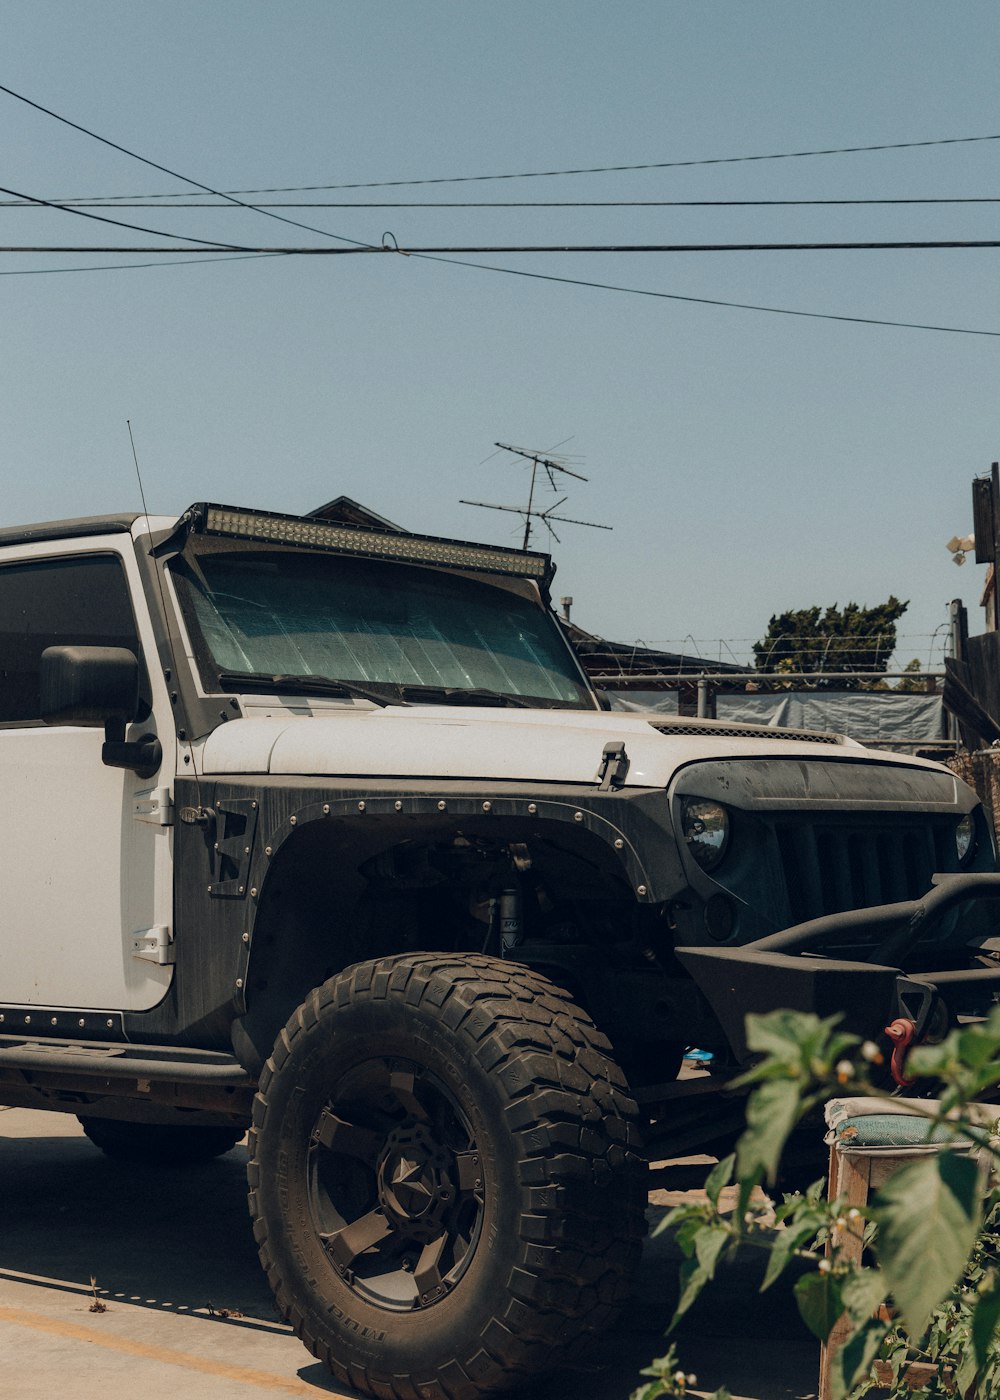 white and black jeep wrangler parked near green plants during daytime